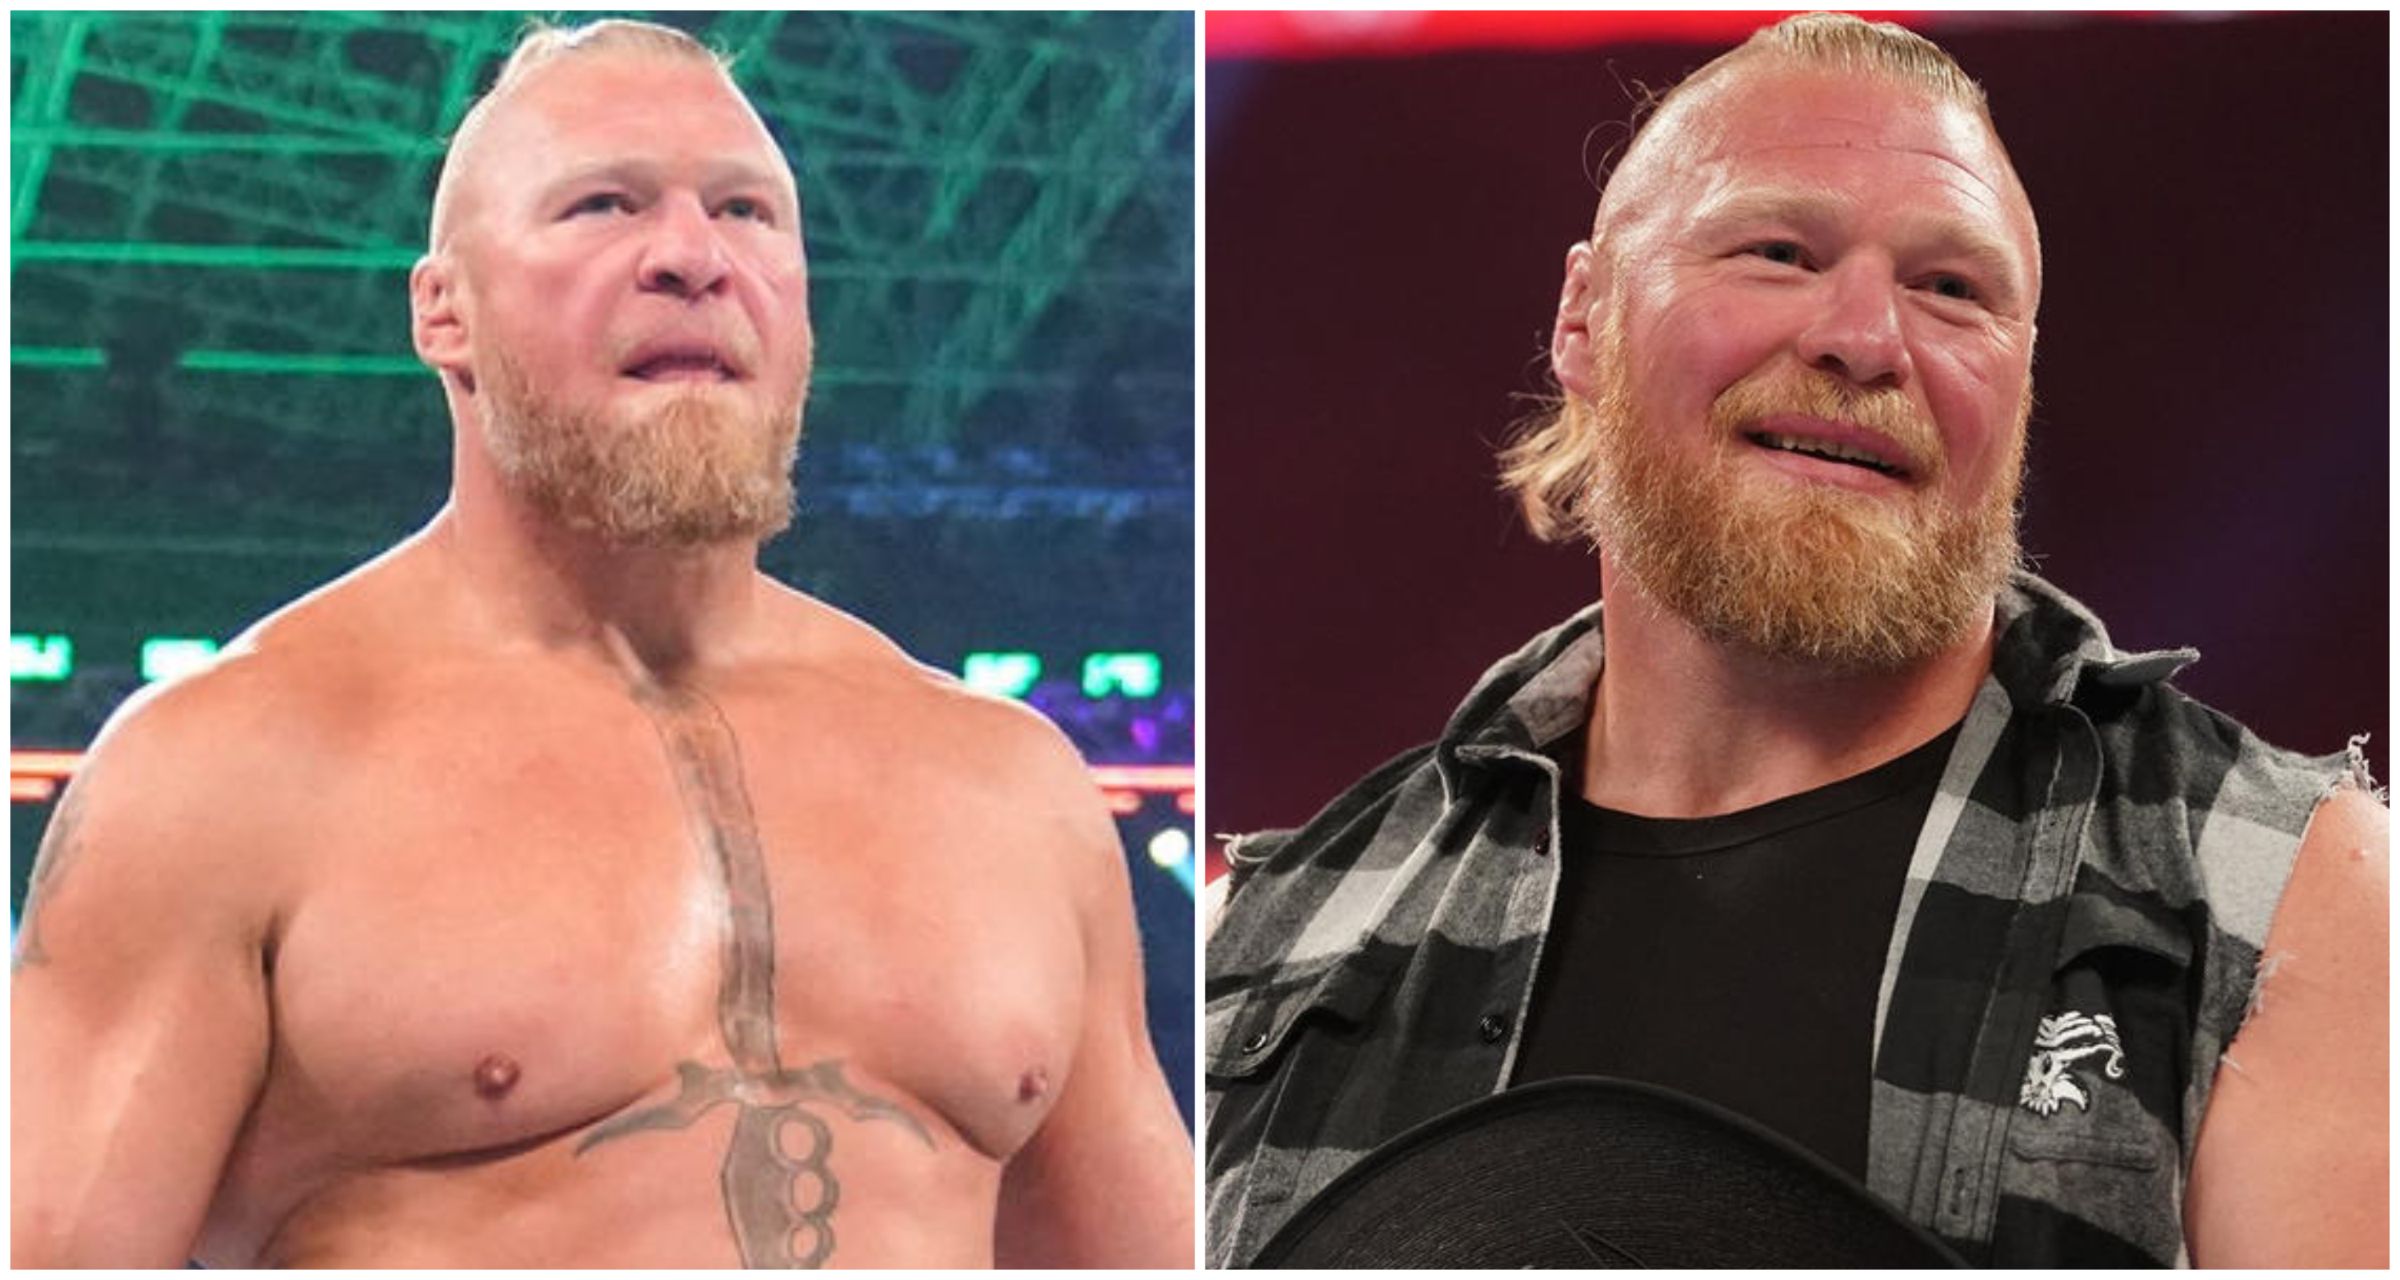 Brock Lesnar blasted by Raw star that 'makes WWE better' for having 'no class'